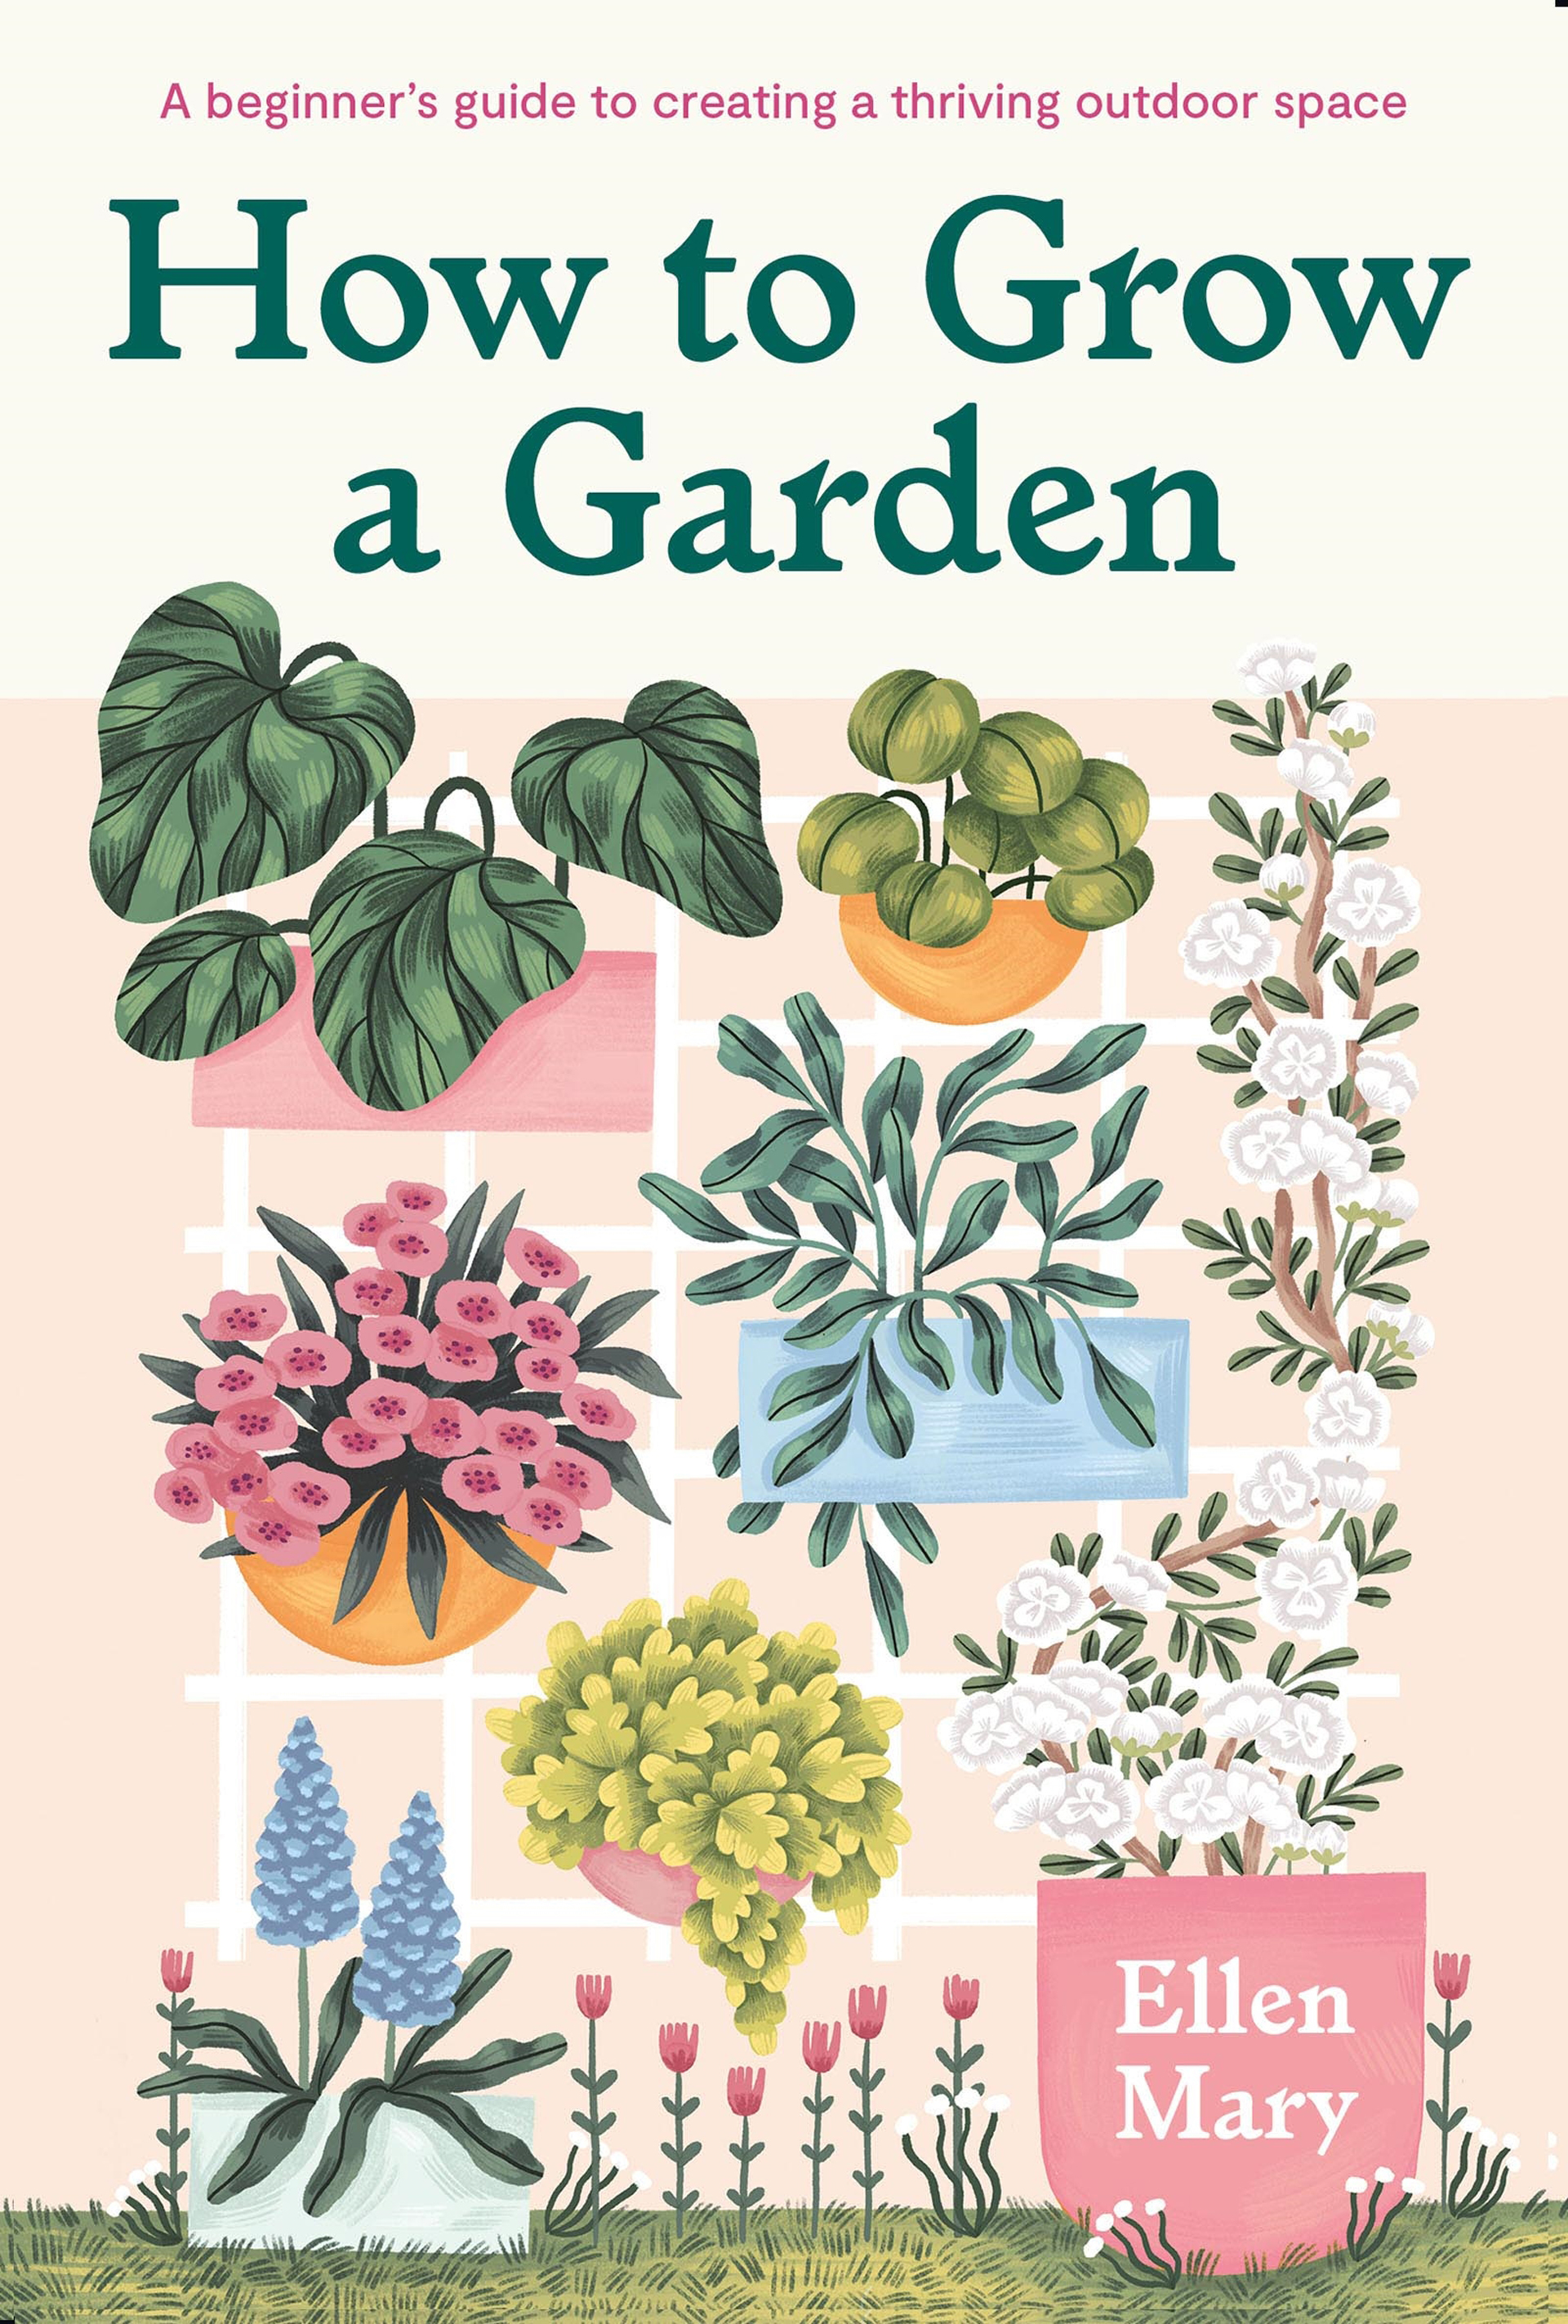 Book jacket of How To Grow A Garden by Ellen Mary (Greenfinch/PA)